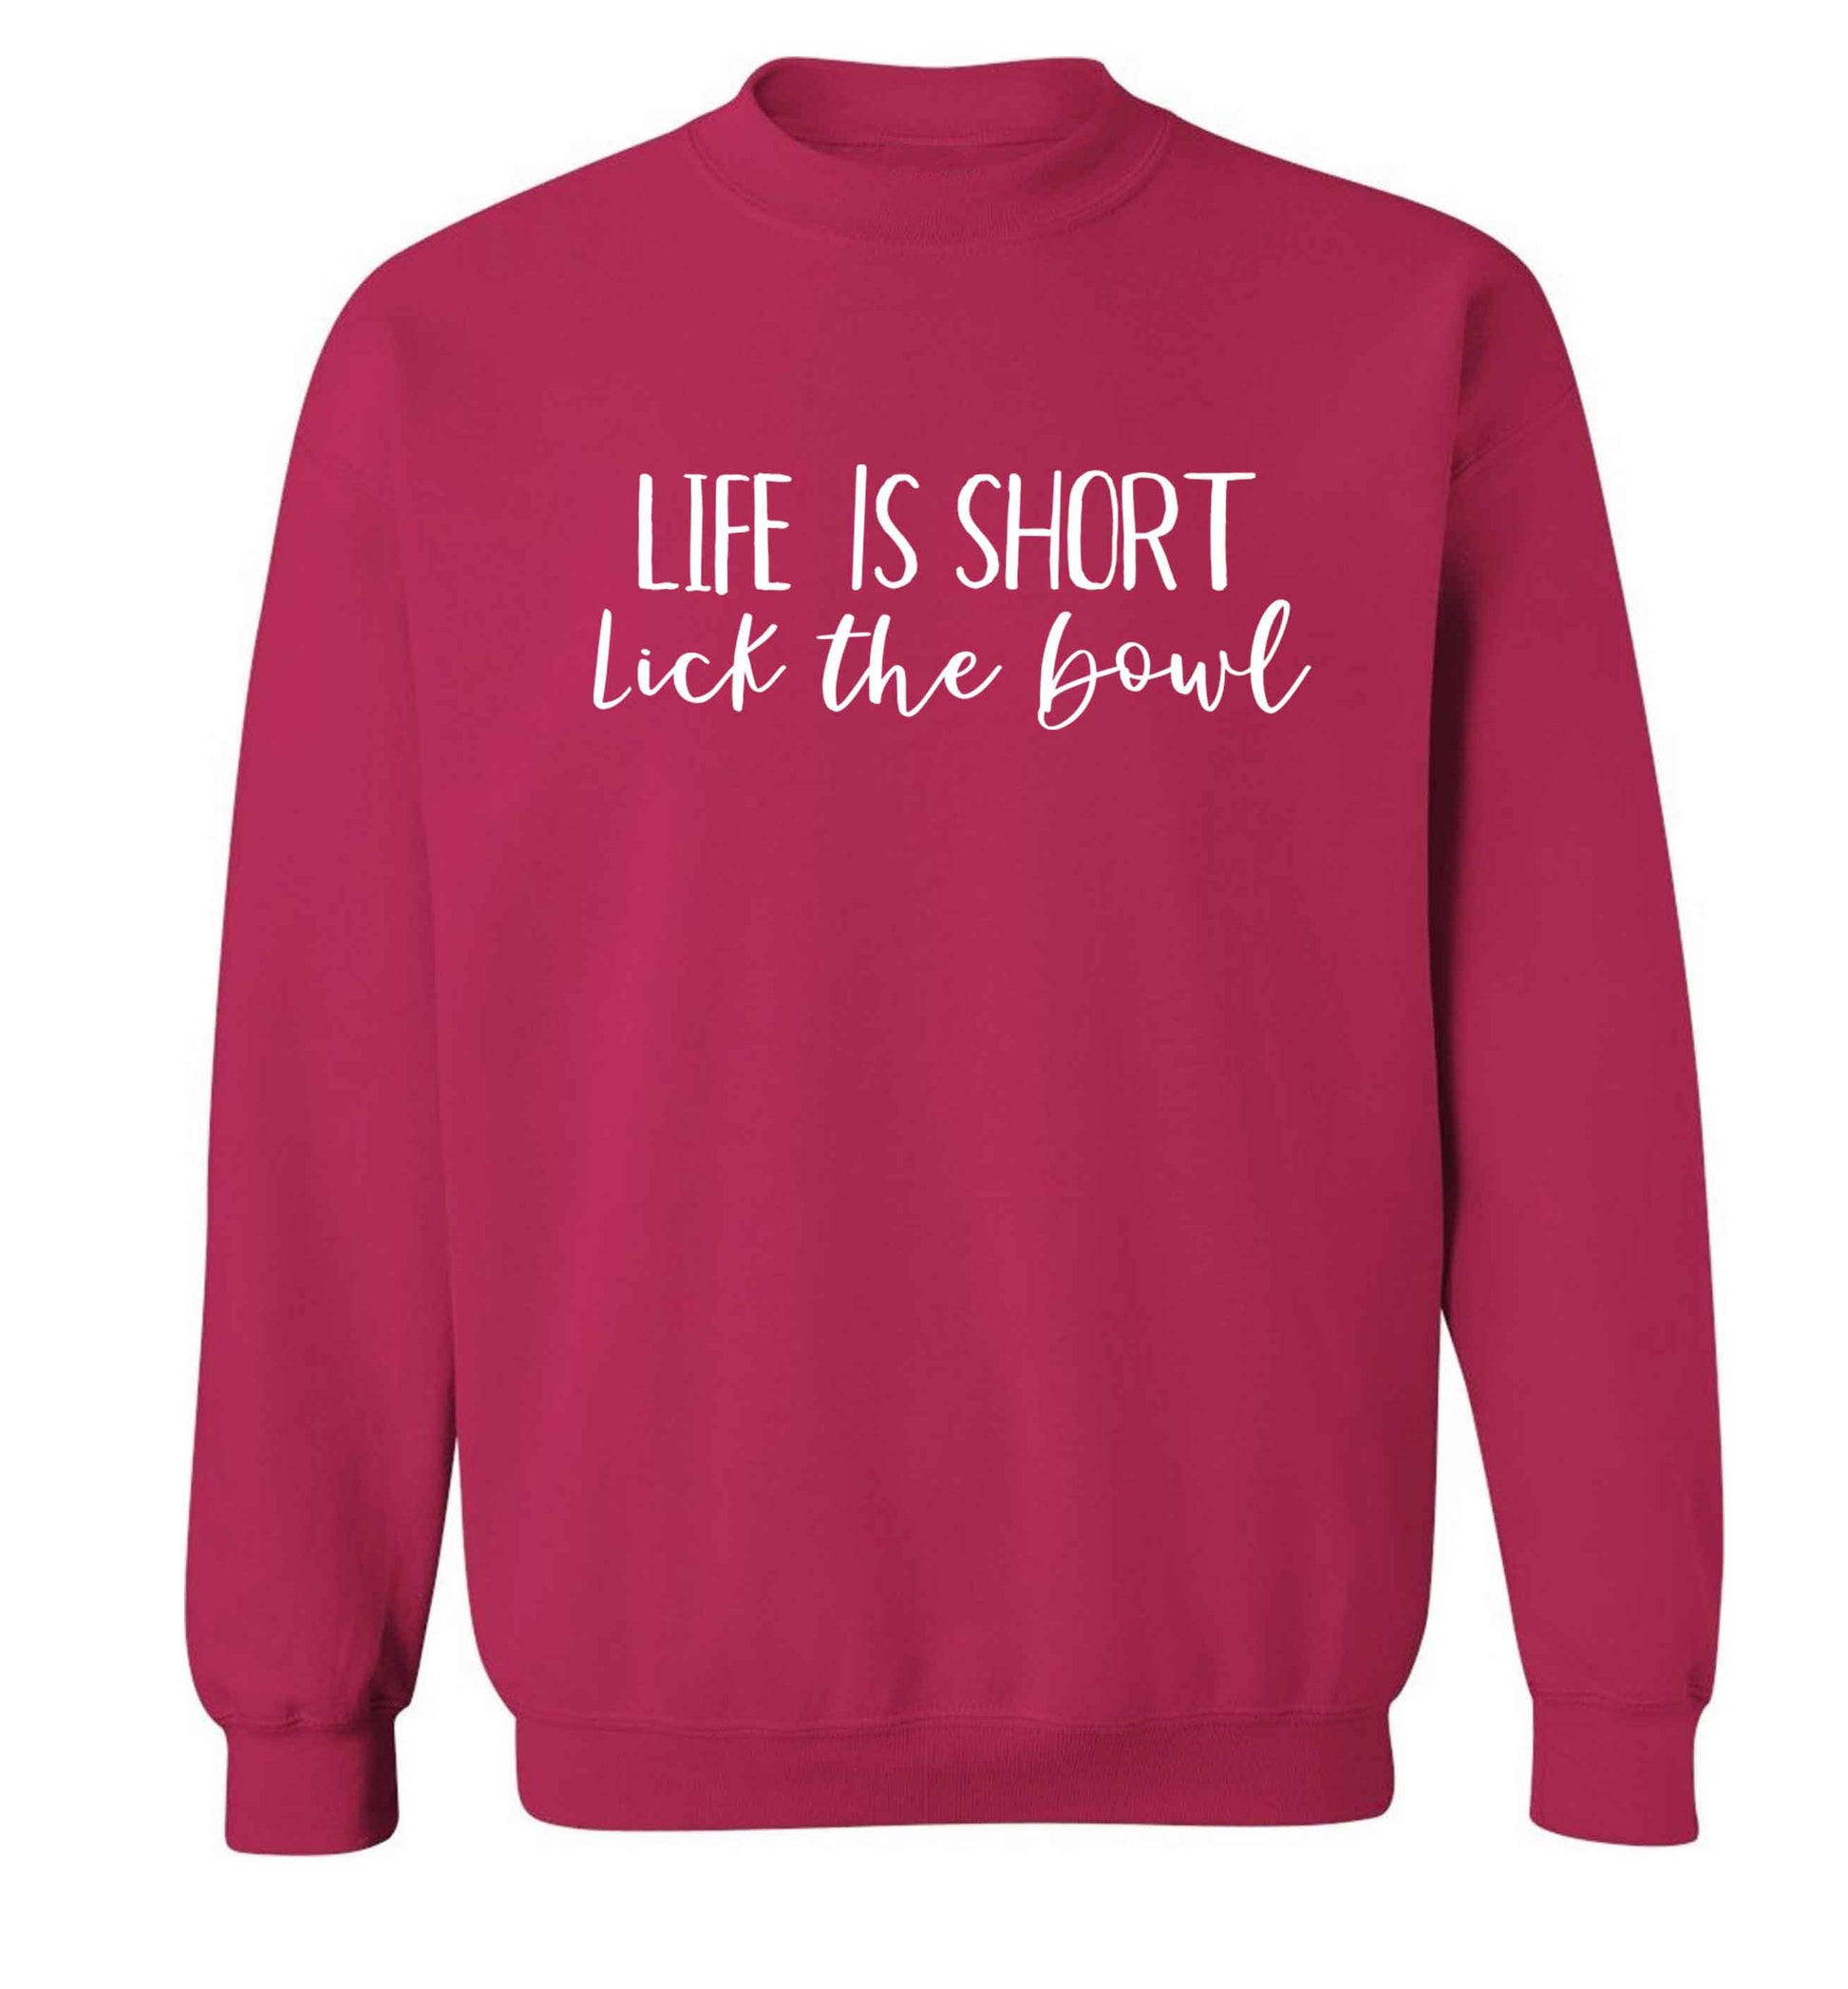 Life is short lick the bowl Adult's unisex pink Sweater 2XL